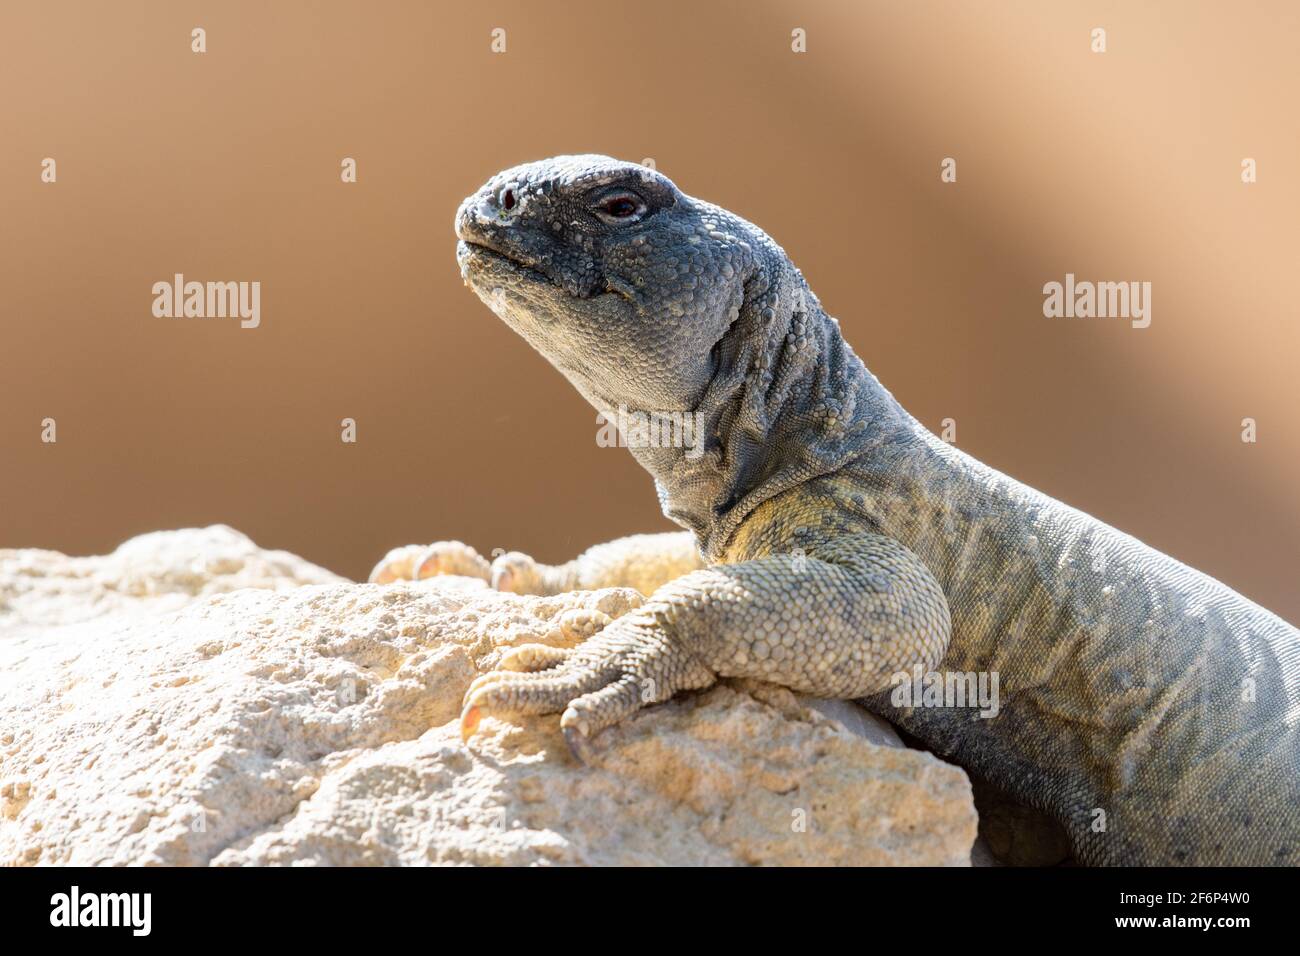 A green Leptien's Spiny Tailed Lizard (Uromastyx aegyptia leptieni) resting on a rock very close up. Stock Photo